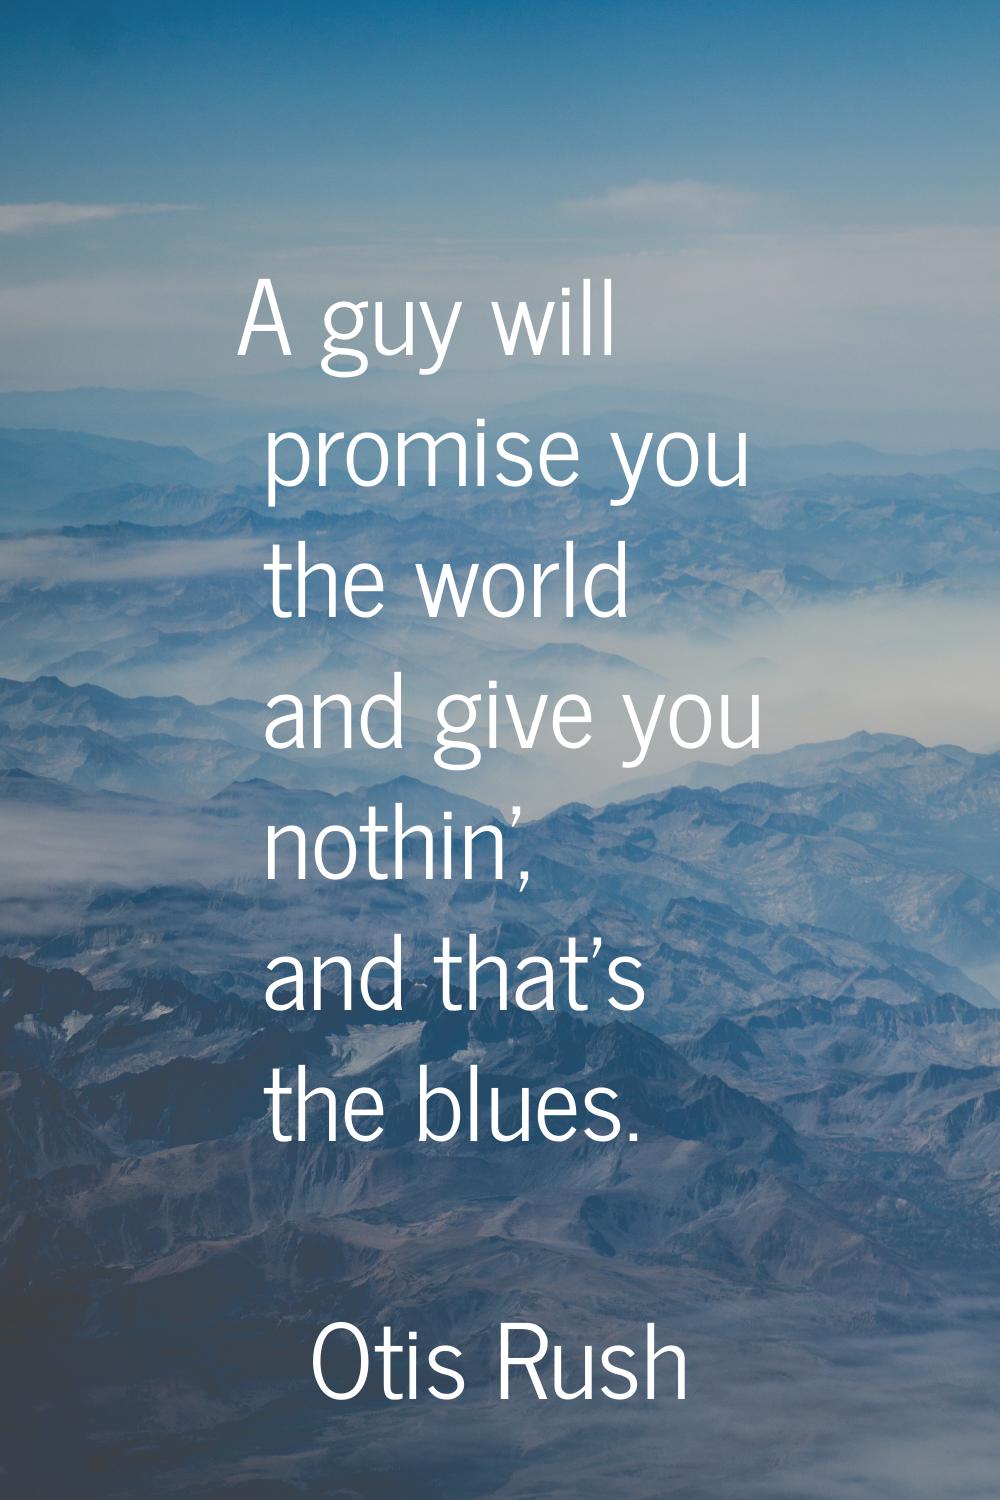 A guy will promise you the world and give you nothin', and that's the blues.